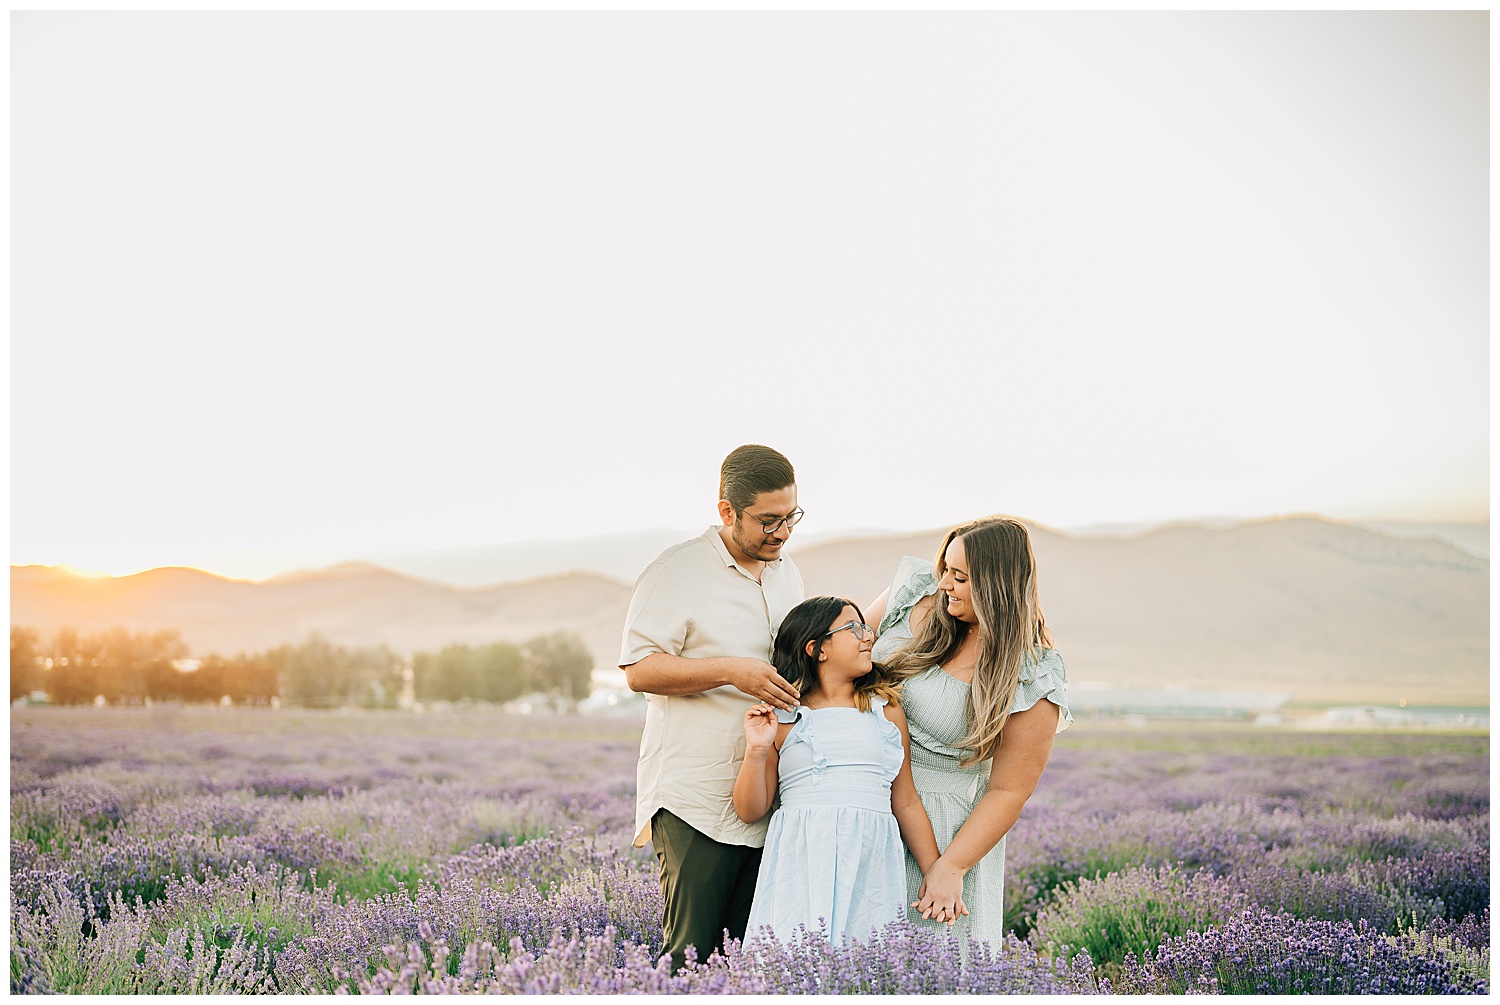 Family pictures at the Mona lavender fields. 